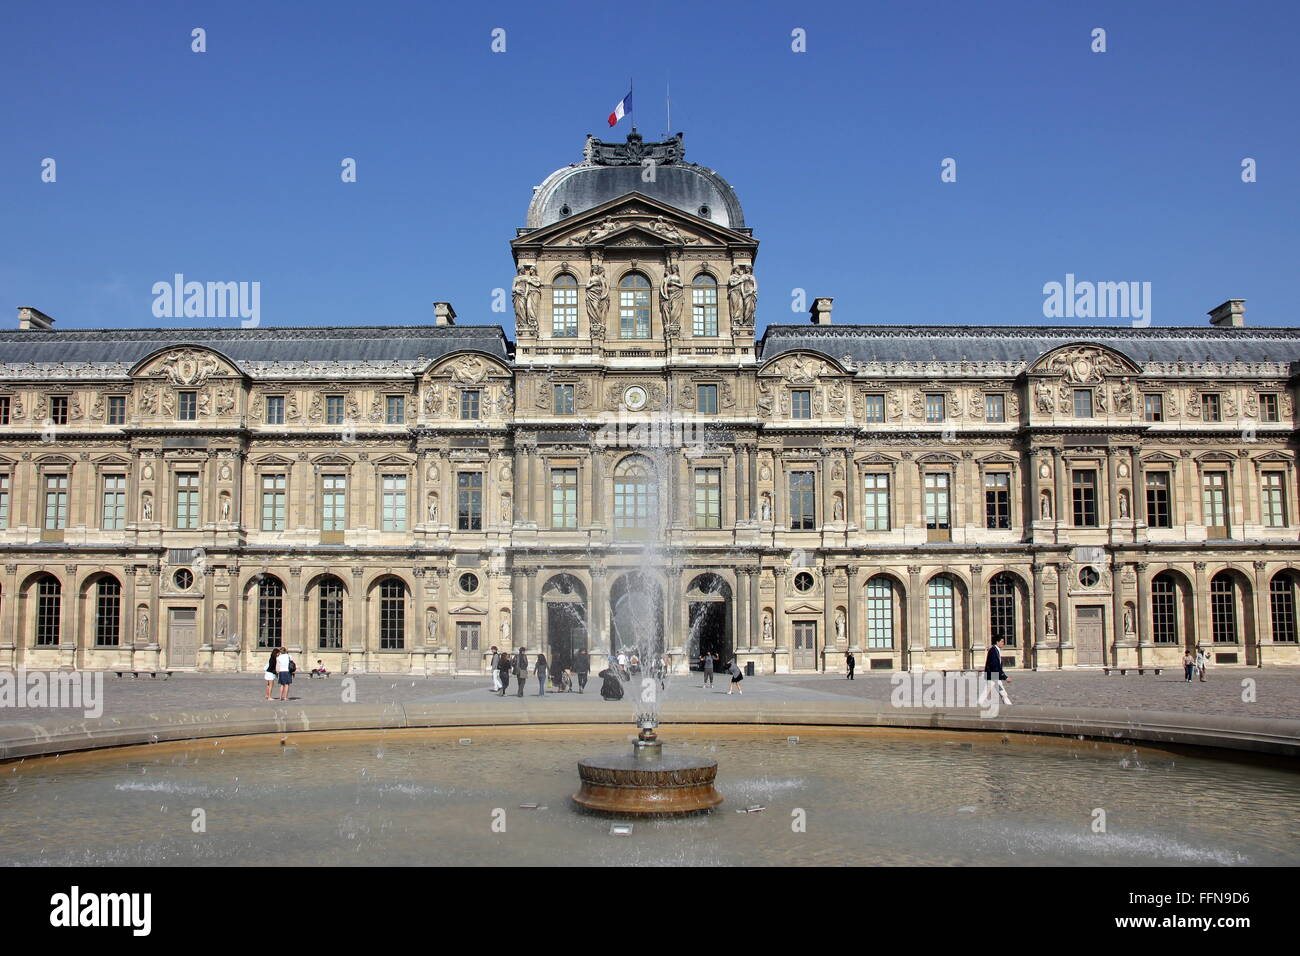 Géographie / voyages, France, Paris, Louvre, Additional-Rights Clearance-Info-fontaine,-Not-Available Banque D'Images